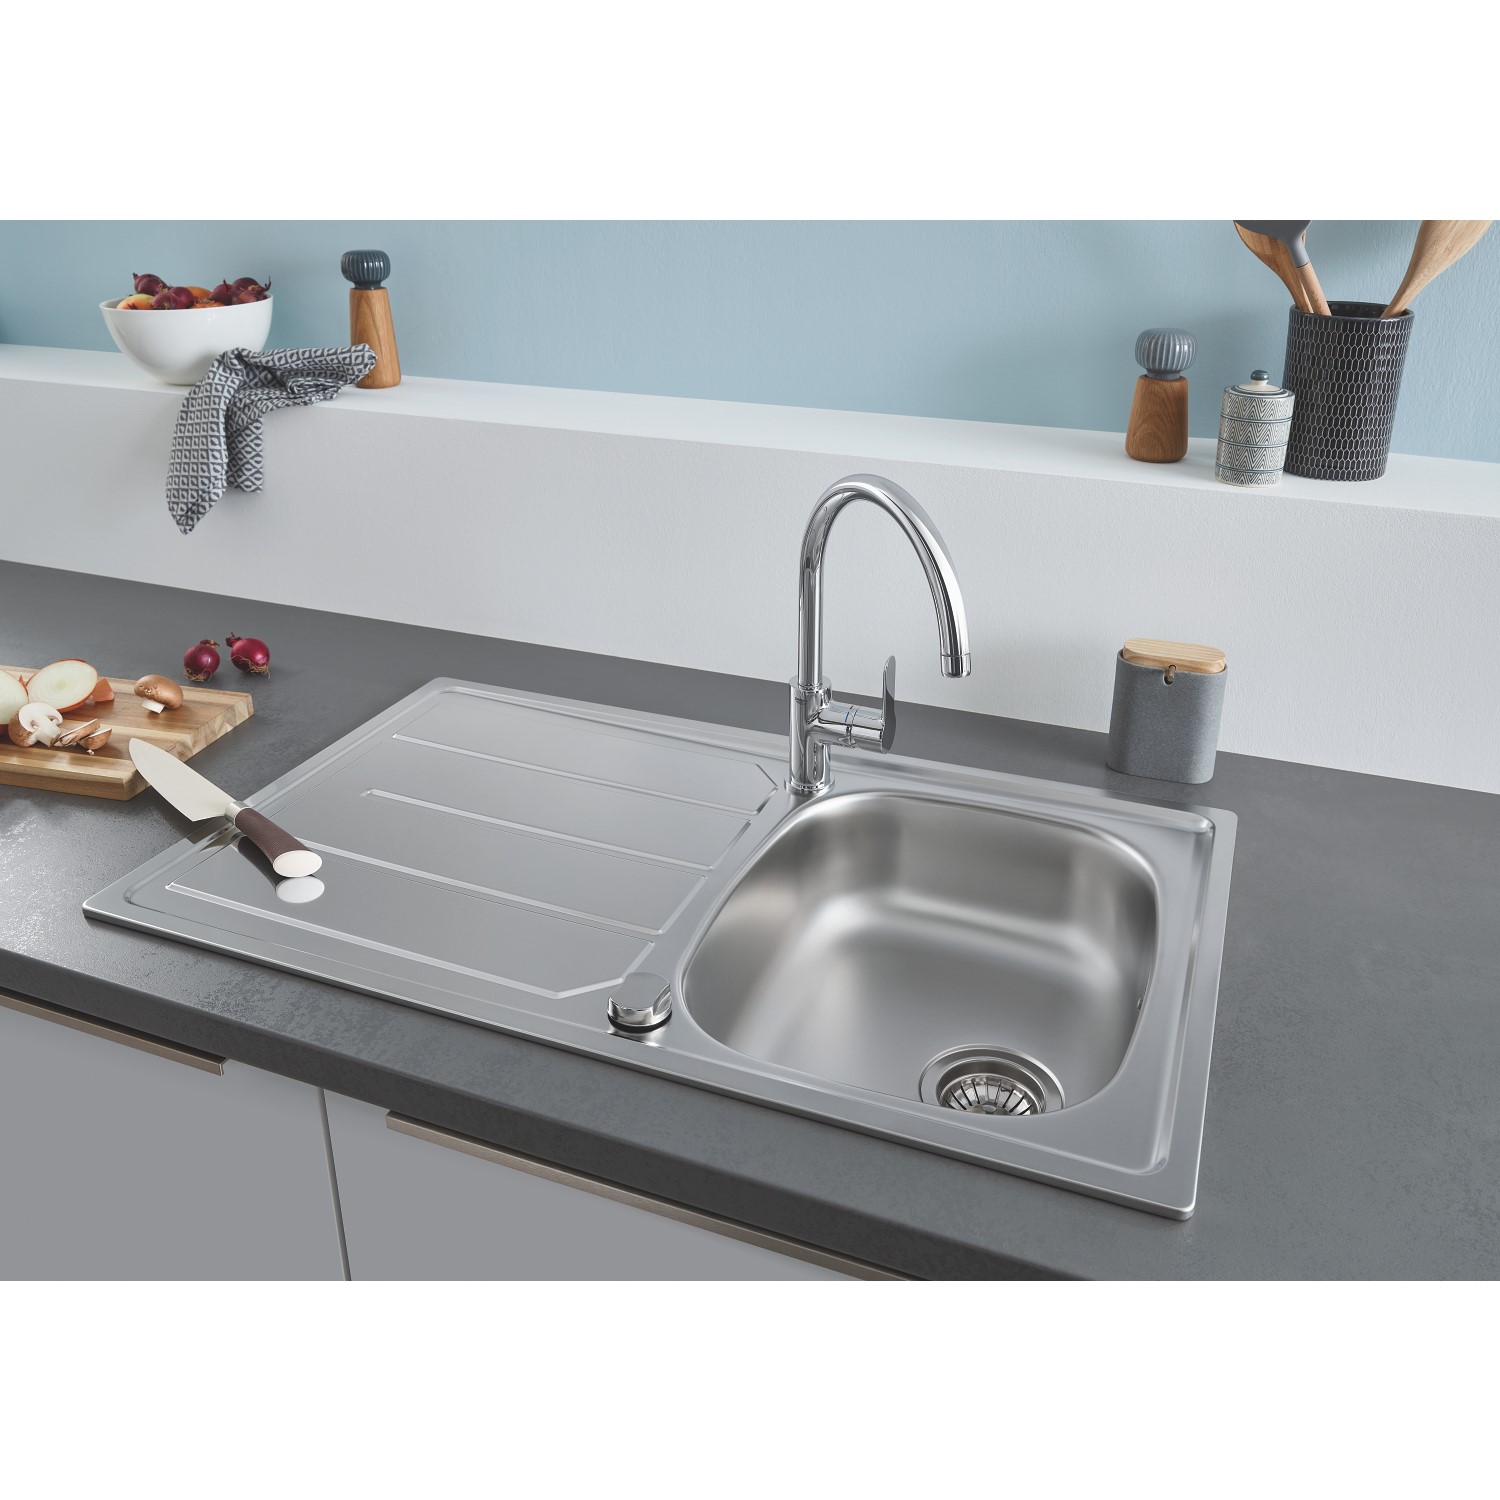 Grohe K200 10 Bowl Stainless Steel Kitchen Sink 31552sd0 Appliances Direct